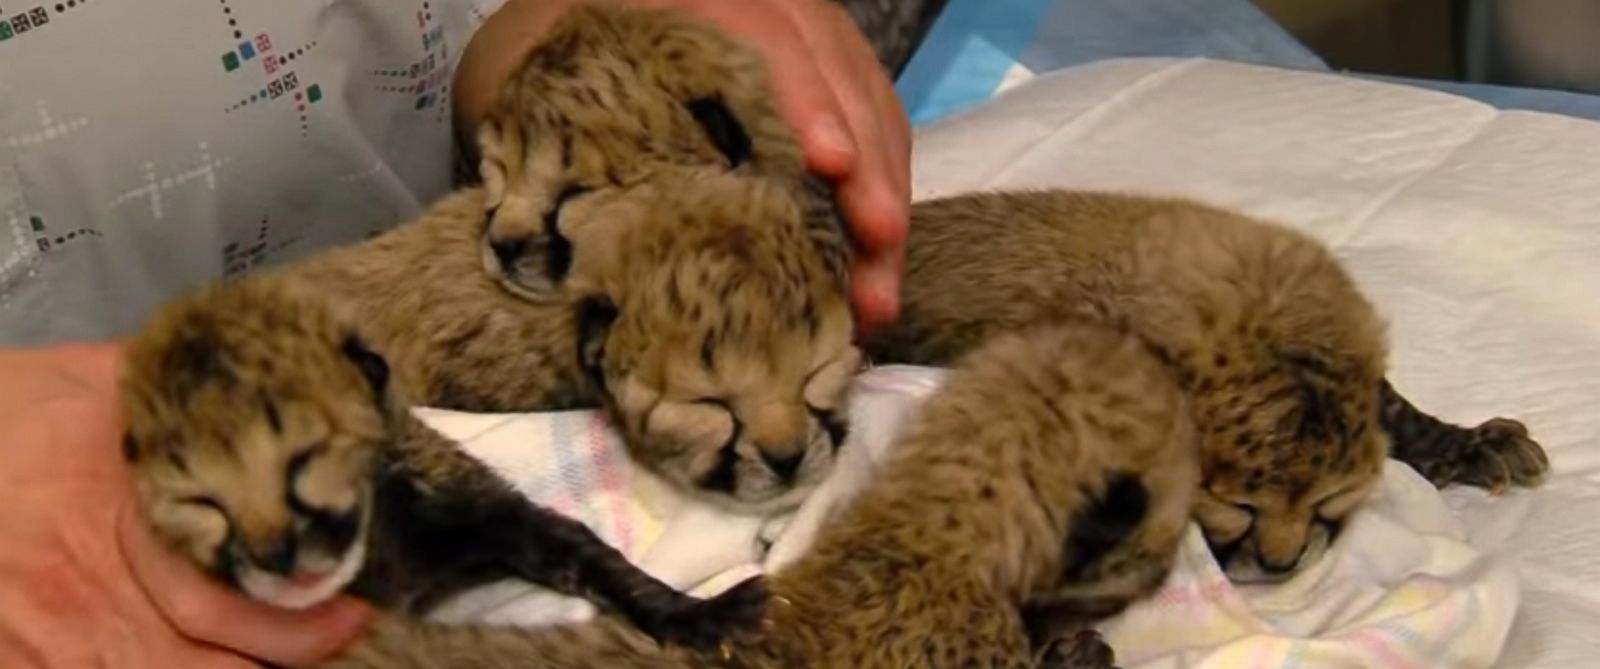 Adorable Video Shows Cheetah Cubs Being Cared for at Cincinnati Zoo After Rare C-Section